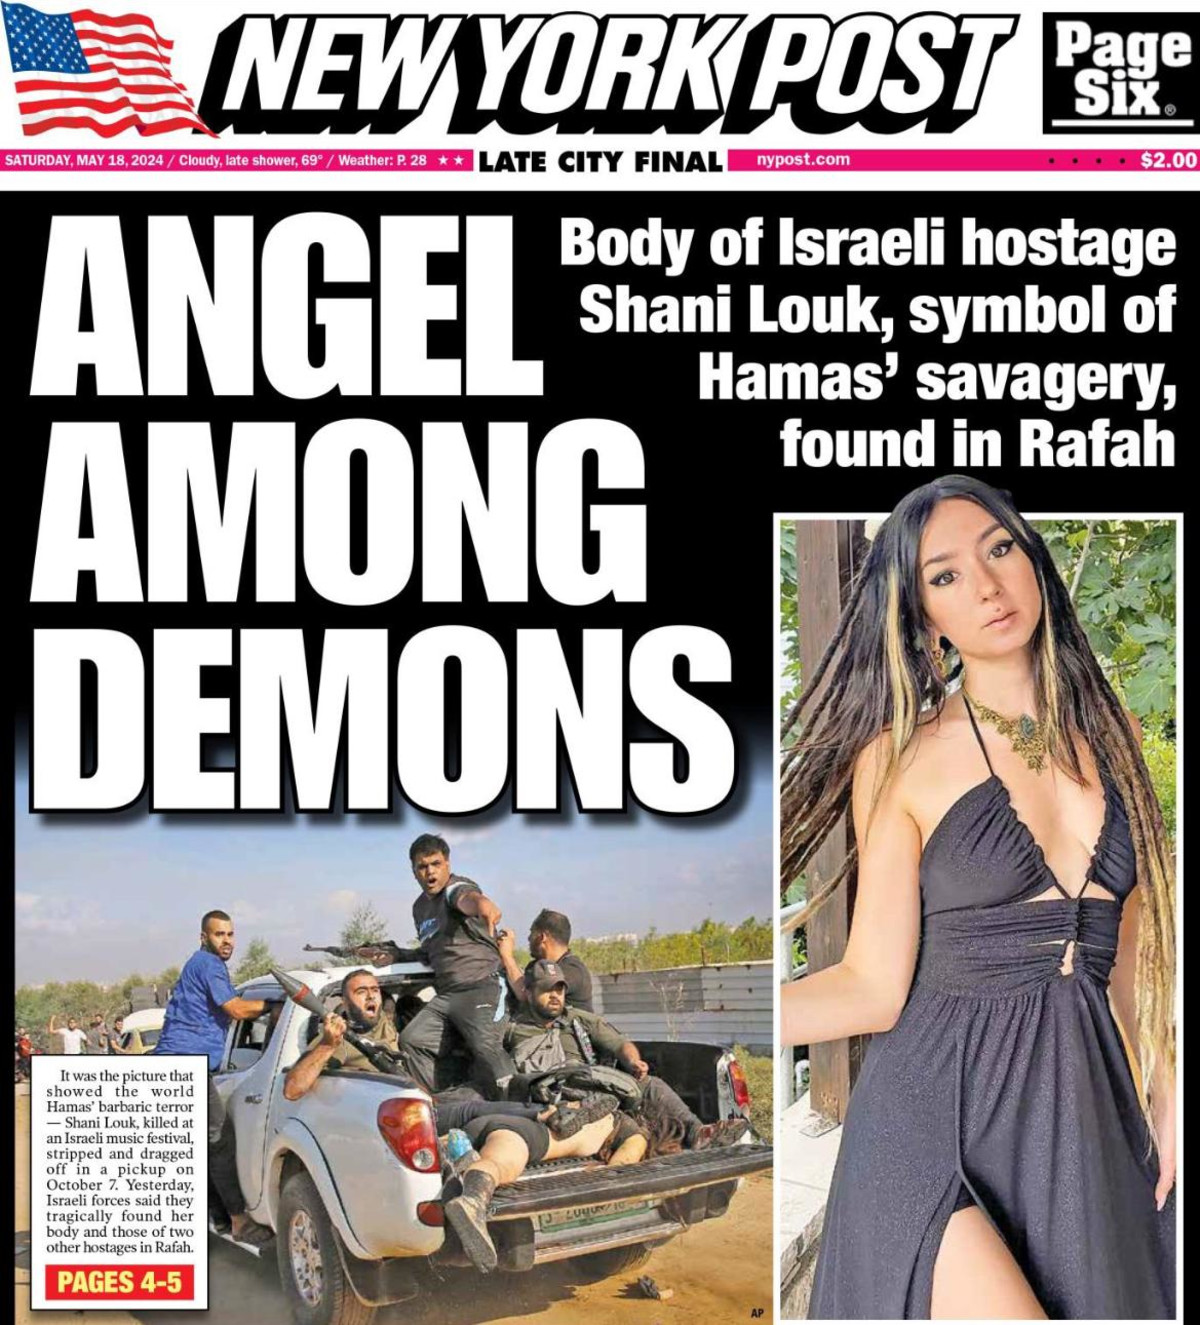 Shani Louk’s body found in Gaza reported by the “New York Post”